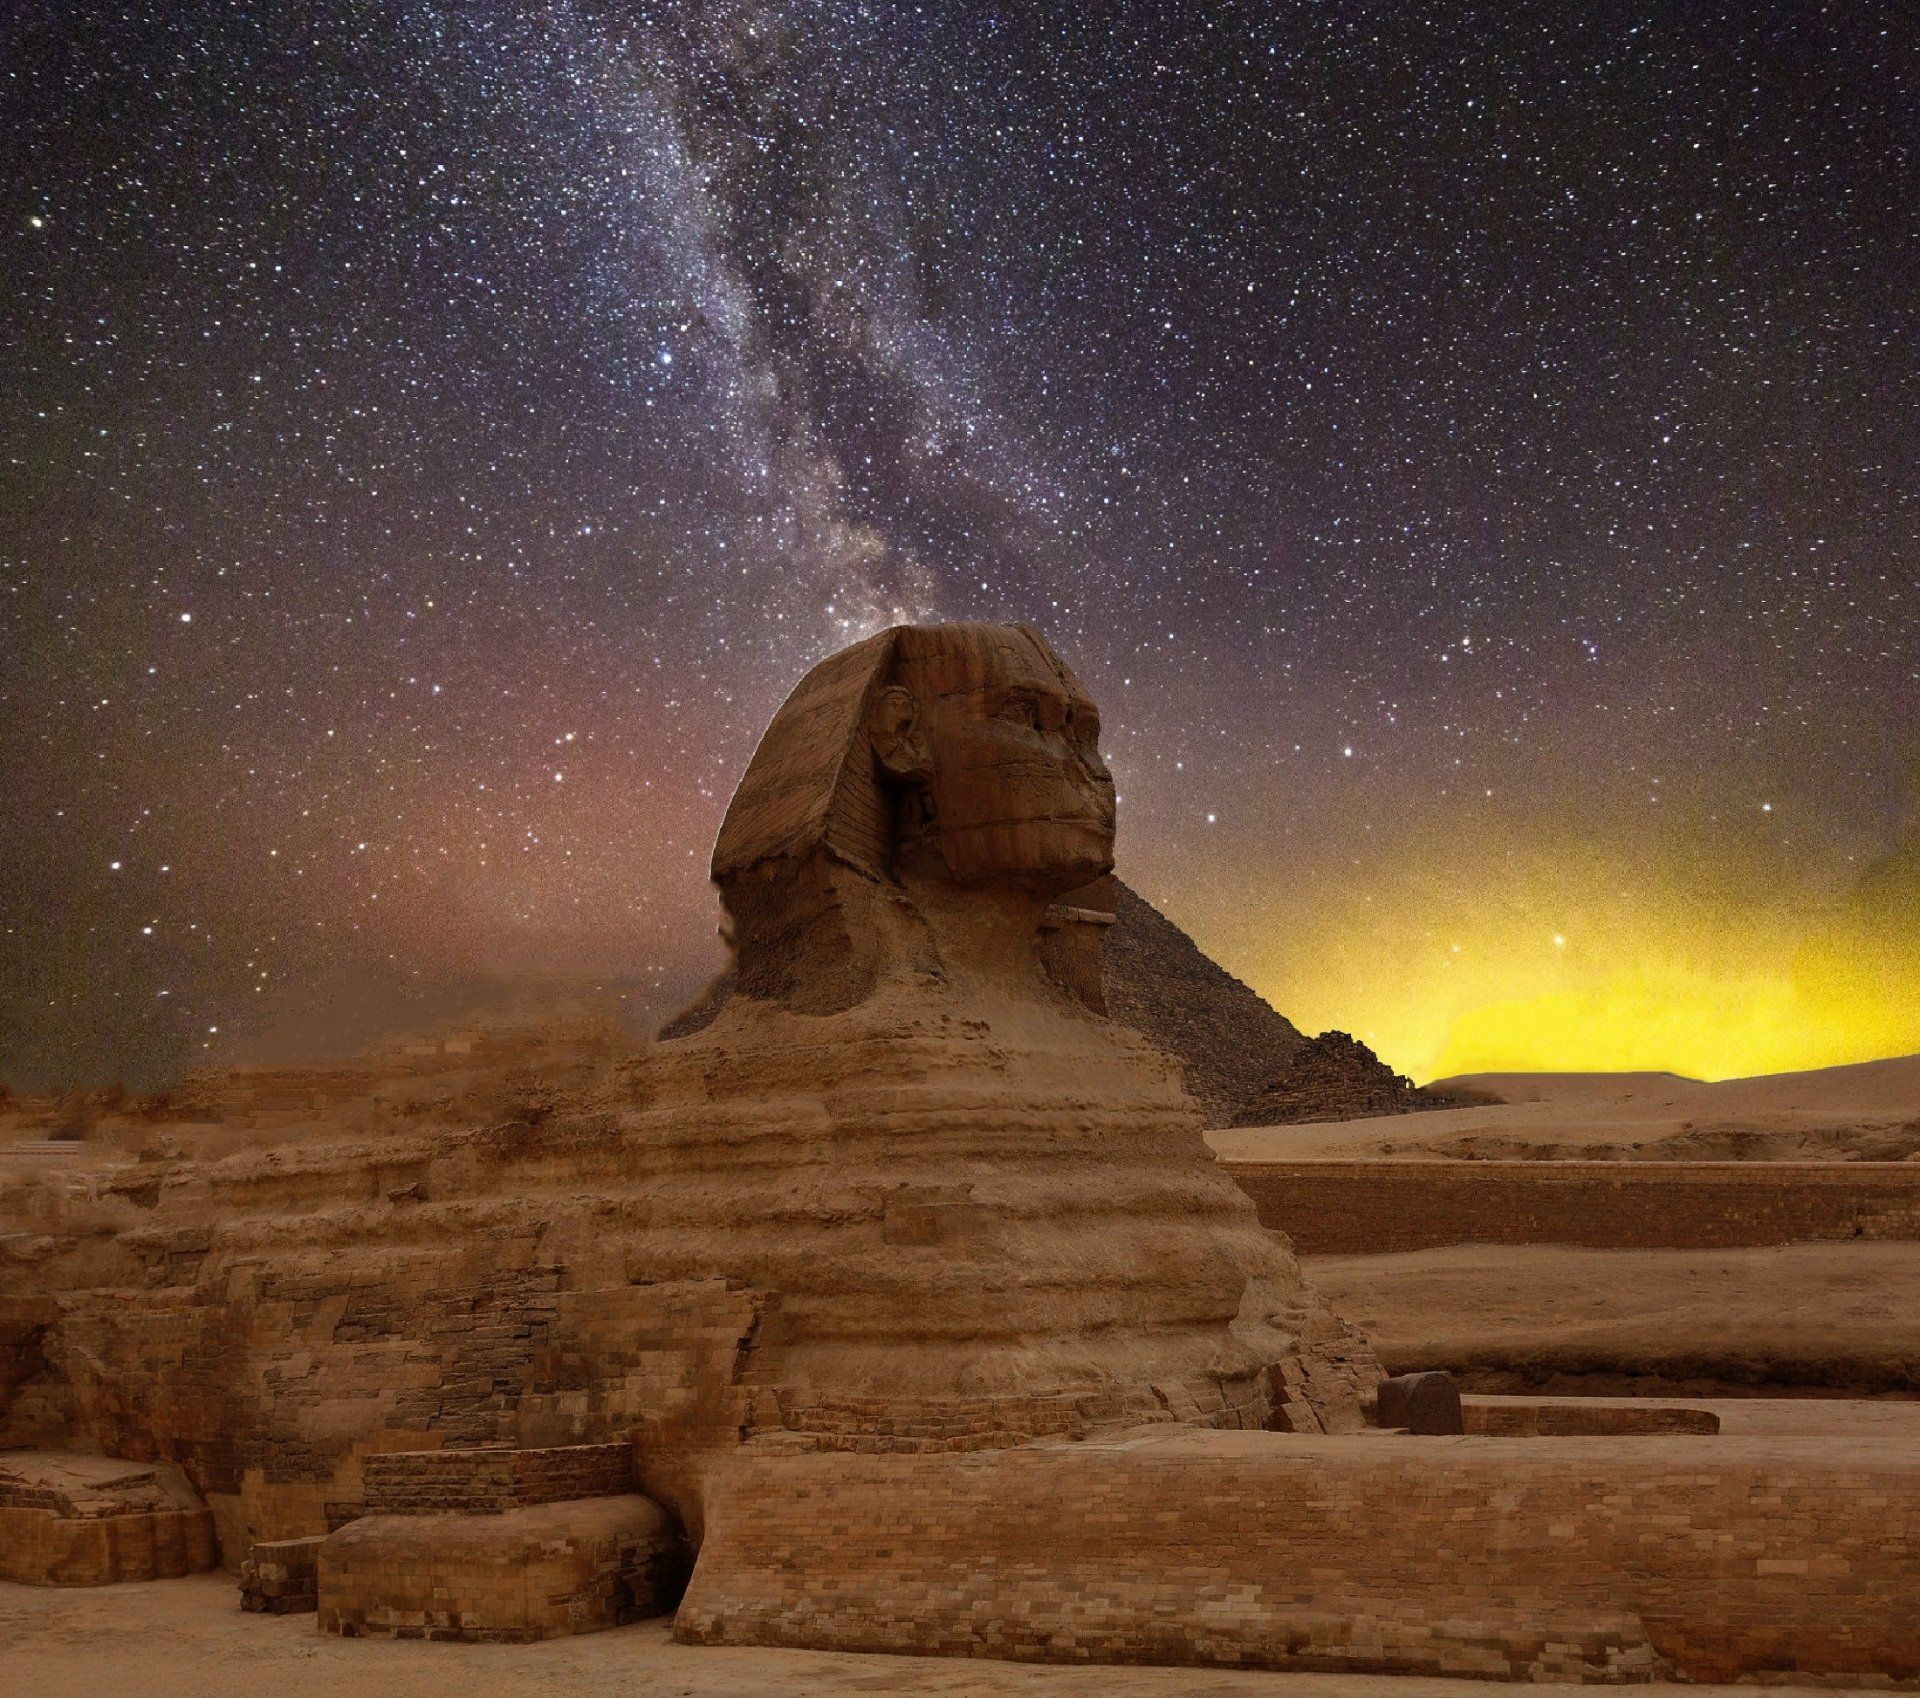 The sphinx at night with the milky way in the background